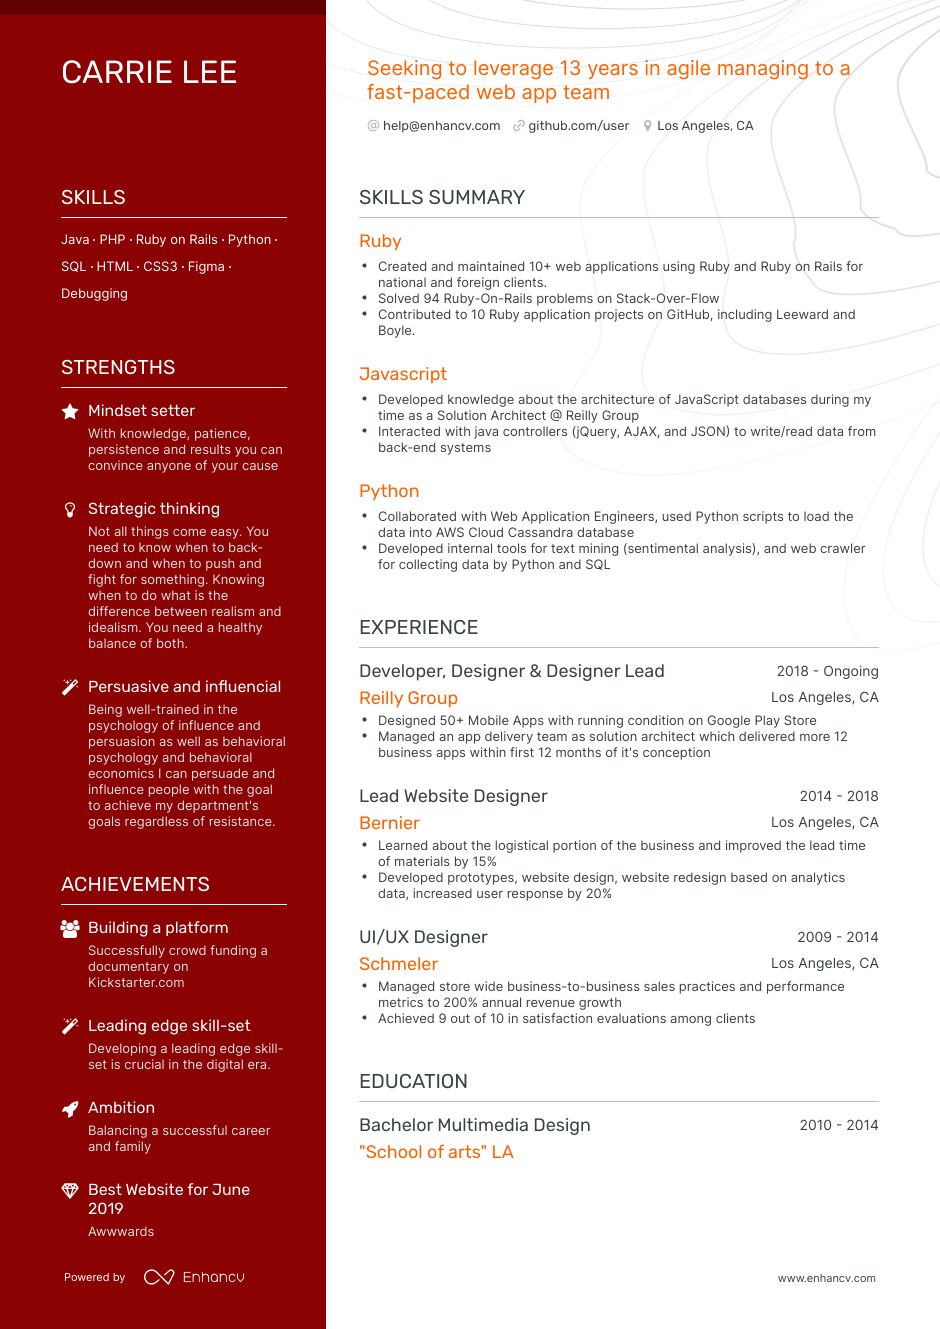 Career pivot CV template with a solid dark orange colored left column. Right column contains skills summary typical of career change CV templates, and experience bullet points below.